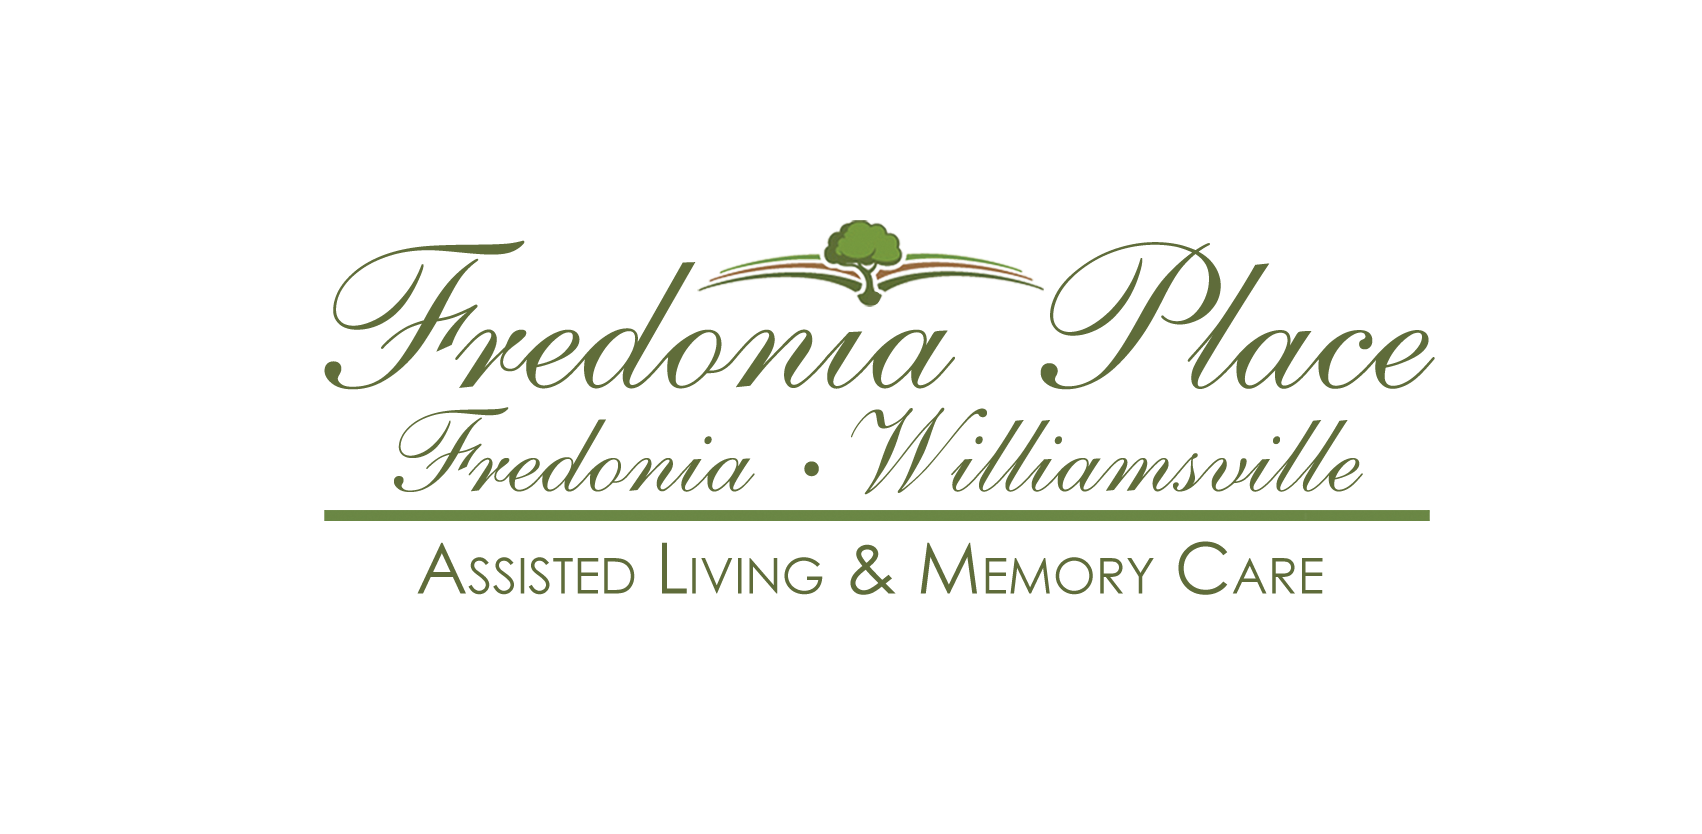 Fredonia Place of Williamsville image